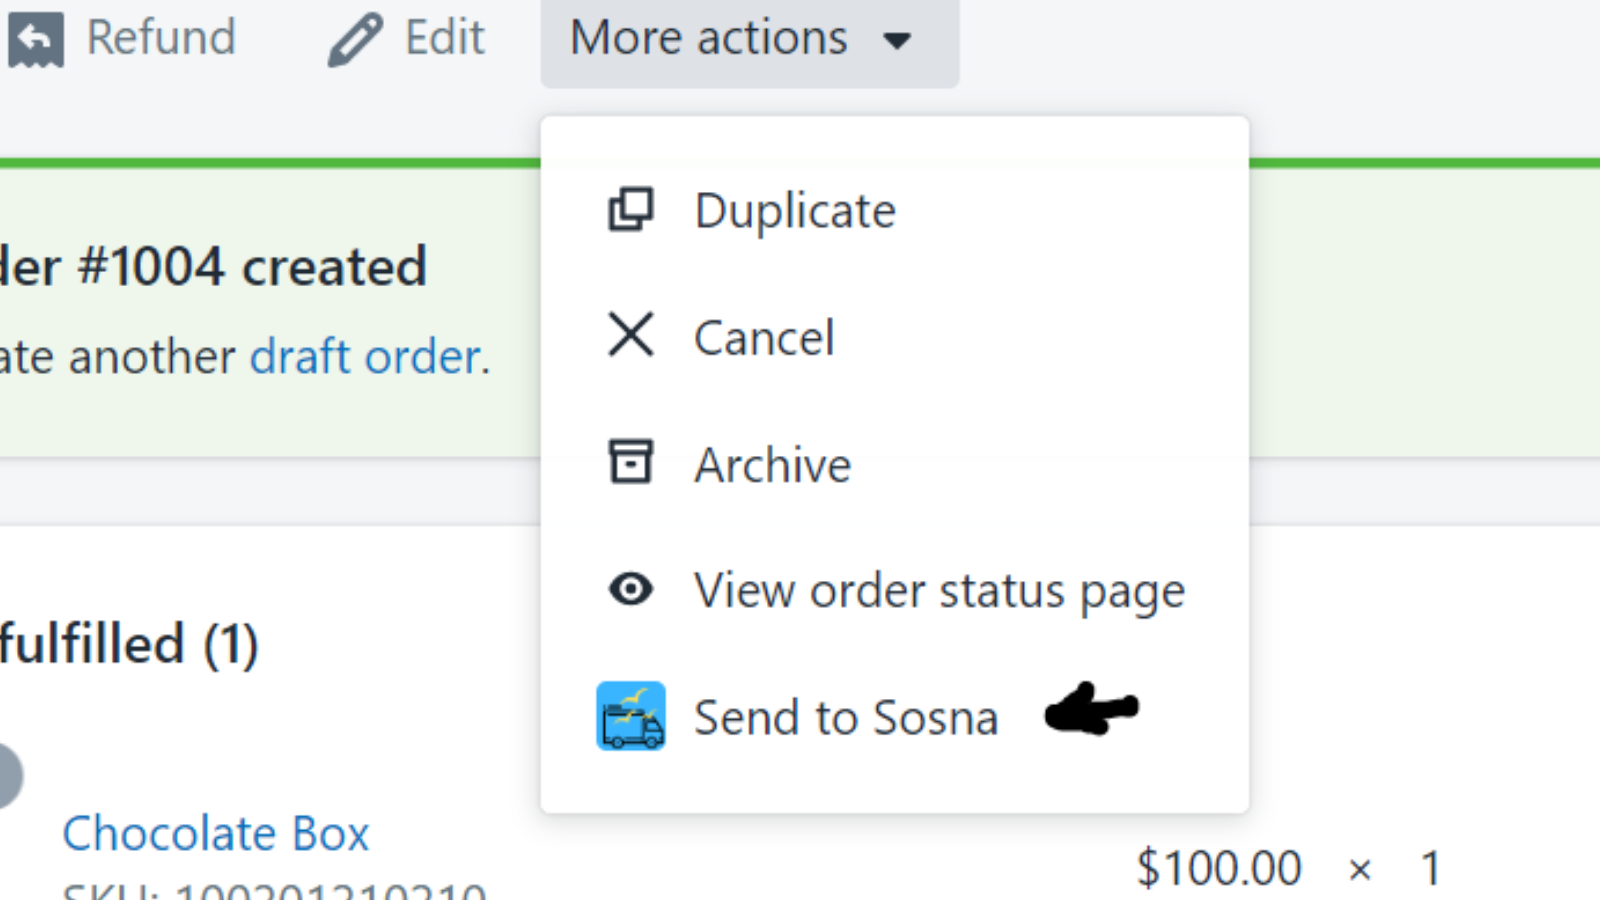 Schedule a Sosna shipment directly from the order page